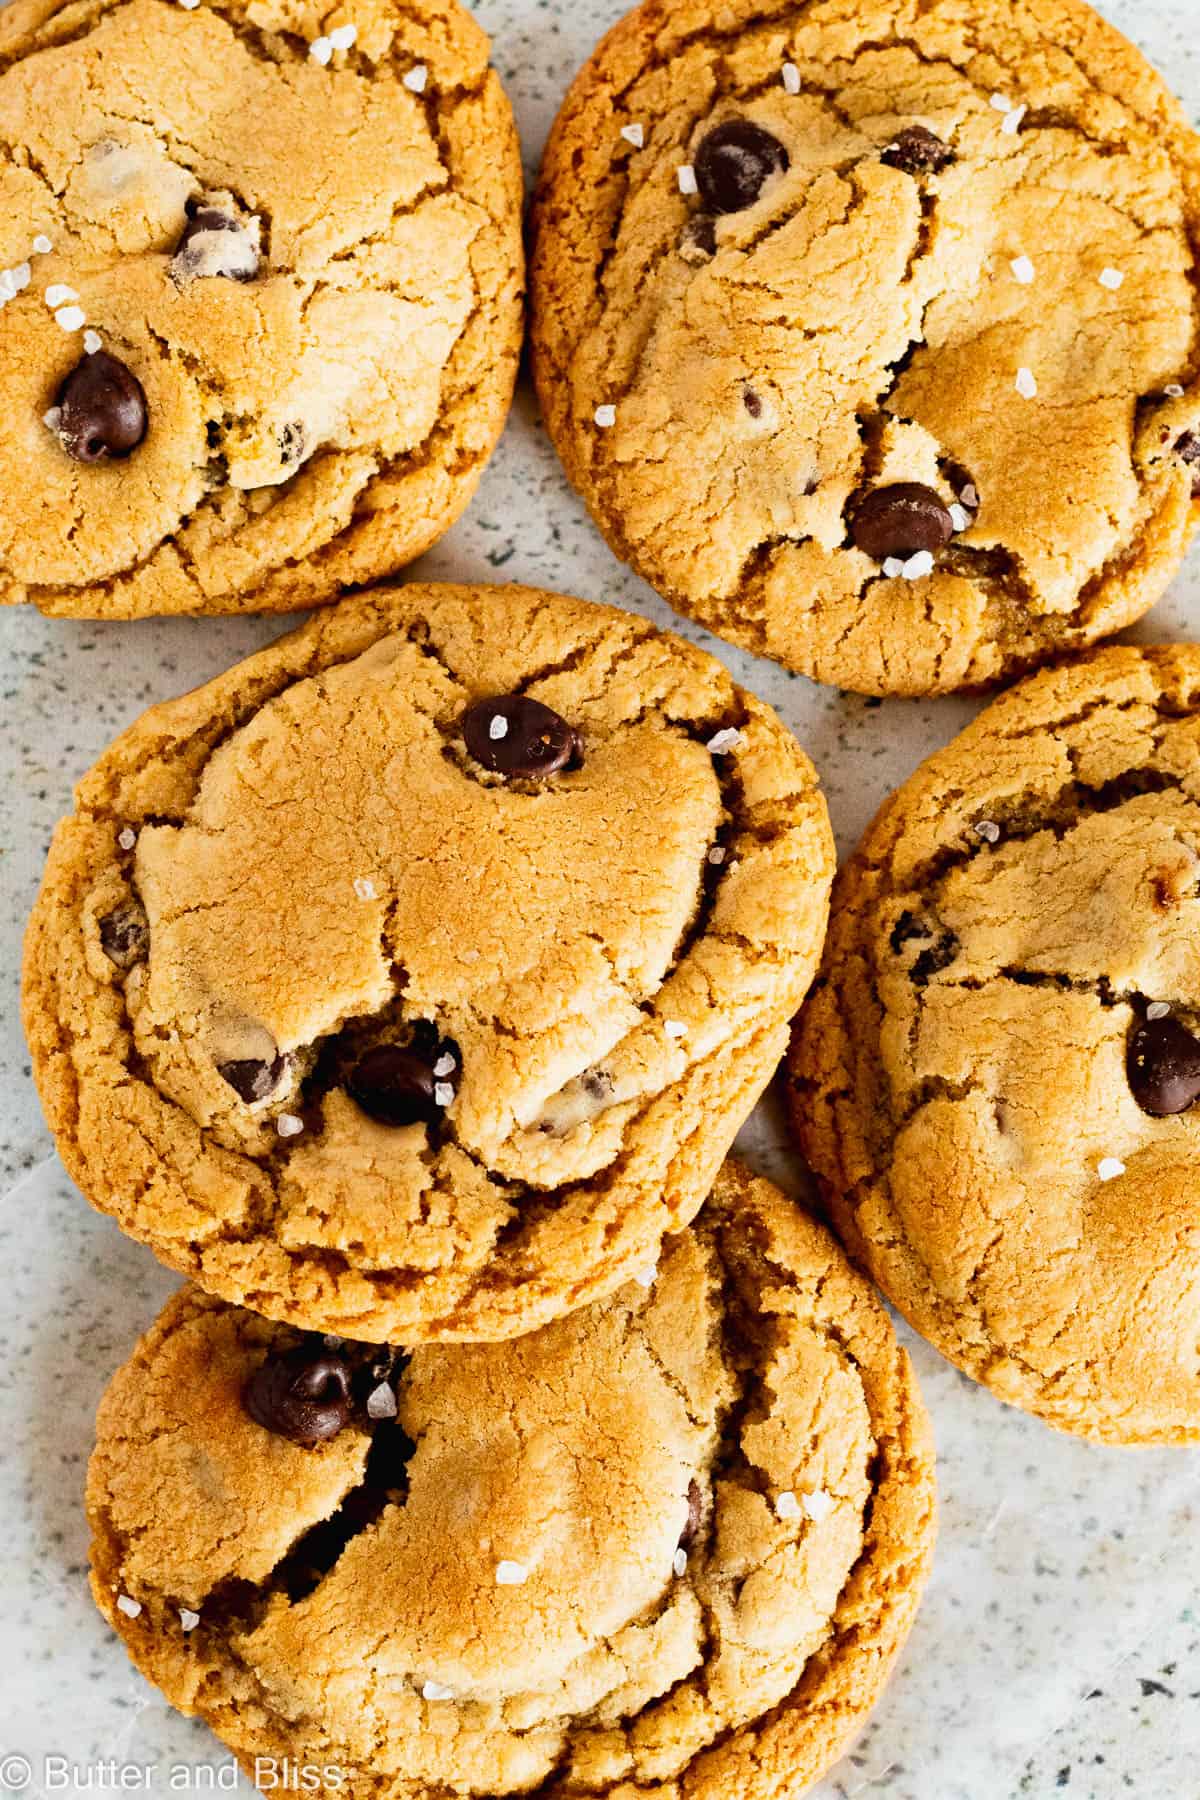 Caramel stuffed chocolate chip cookies in a pile on a table.